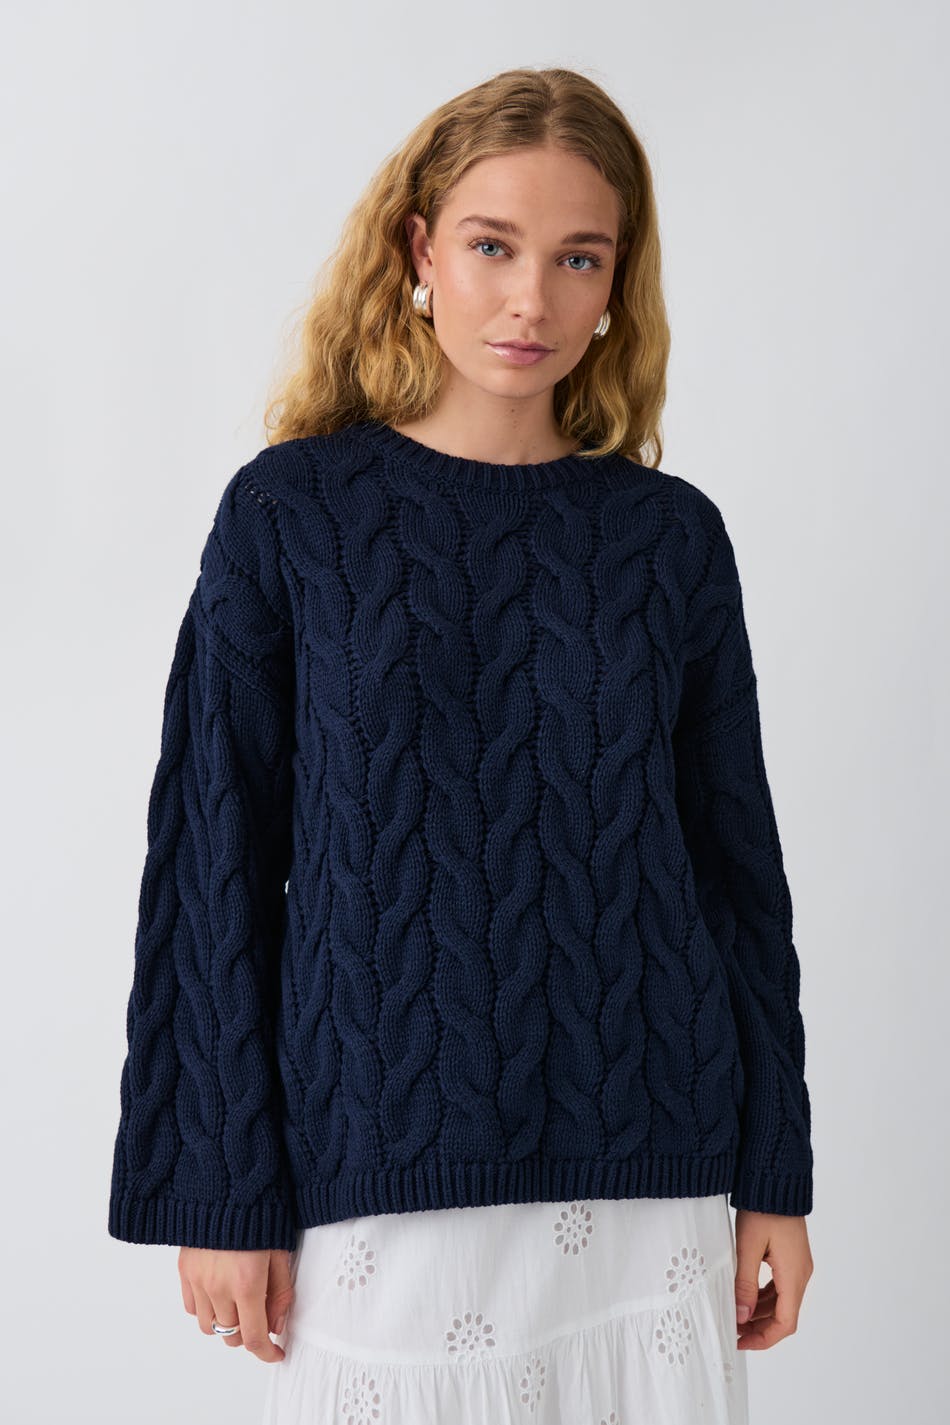  Gina Tricot- Cable knitted sweater - Strickpullis- Blue - L- Female